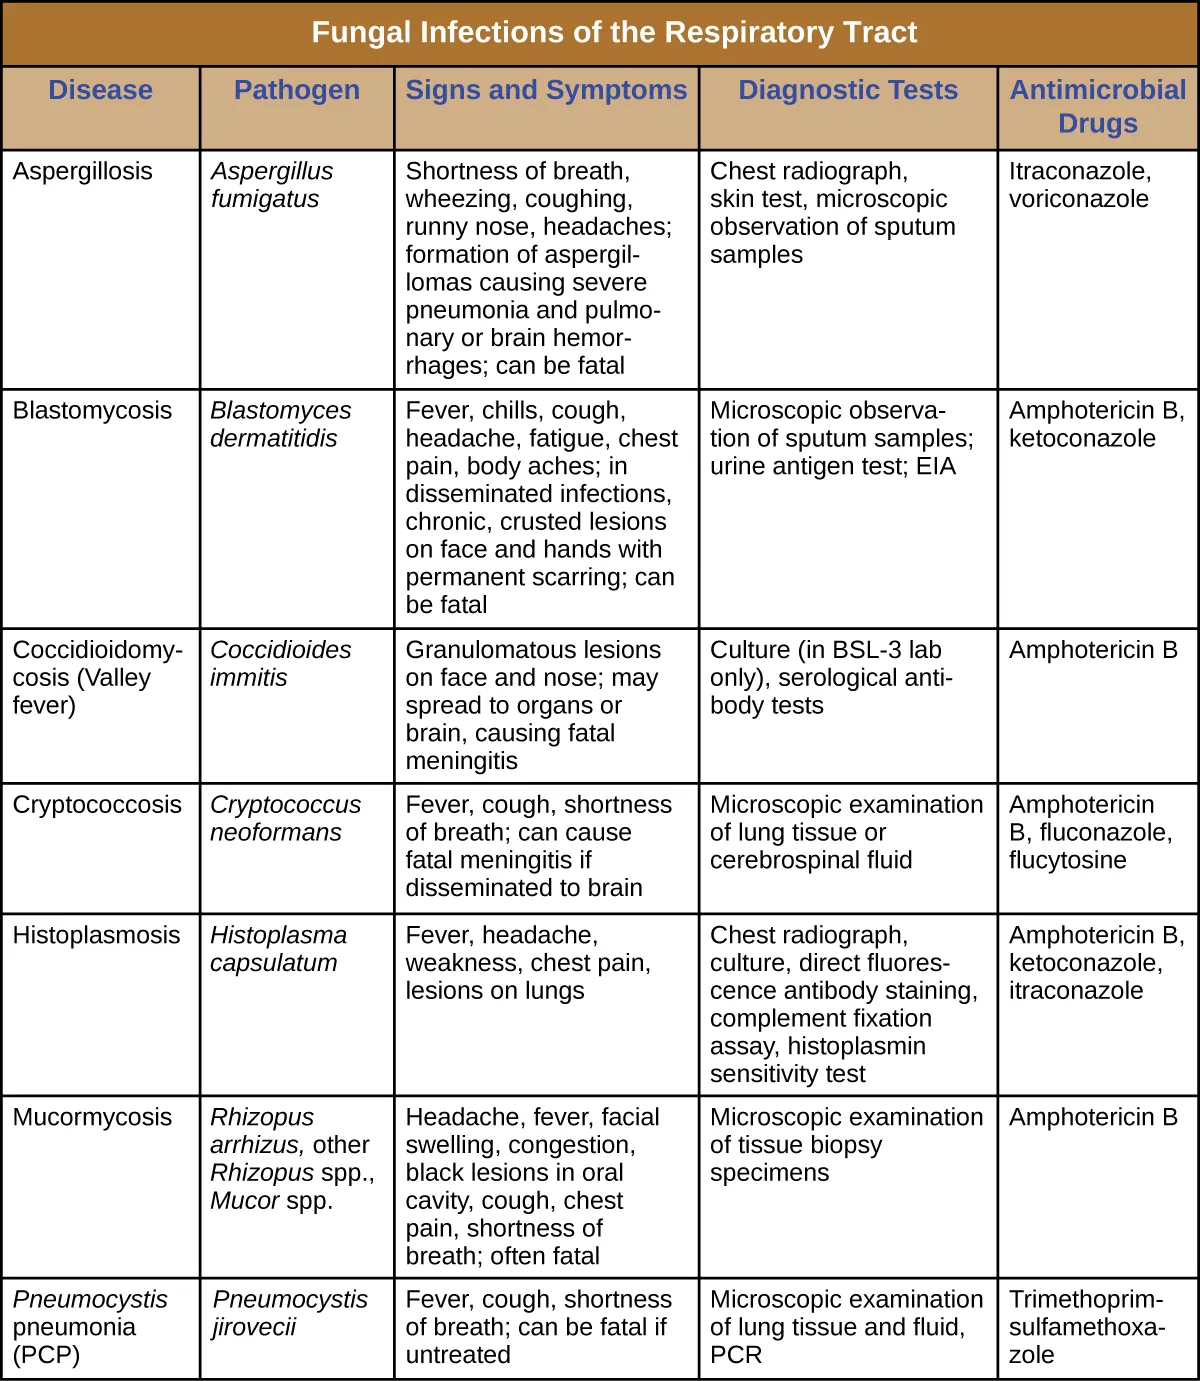 Table titled: Fungal Infections of the Respiratory Tract. Columns: Disease, Pathogen, Signs and Symptoms, Diagnostic Tests, Antimicrobial Drugs. Aspergillosis; Aspergillus fumigatus; Shortness of breath, wheezing, coughing, runny nose, headaches; formation of aspergillomas causing severe pneumonia and pulmonary or brain hemorrhages; can be fatal; Chest radiograph, skin test, microscopic observation of sputum samples; Itraconazole, voriconazole. Blastomycosis; Blastomyces dermatitidis; Fever, chills, cough, headache, fatigue, chest pain, body aches; in disseminated infections, chronic, crusted lesions on face and hands with permanent scarring; can be fatal; Microscopic observation of sputum samples; urine antigen test; EIA; Amphotericin B, ketoconazole; Coccidioidomycosis (Valley fever); Coccidioides immitis; Granulomatous lesions on face and nose; may spread to organs or brain, causing fatal meningitis; Culture (in BSL-3 lab only), serological antibody tests; Amphotericin B. Cryptococcosis; Cryptococcus neoformans; Fever, cough, shortness of breath; can cause fatal meningitis if disseminated to brain; Microscopic examination of lung tissue or cerebrospinal fluid; Amphotericin B, fluconazole, flucytosine. Histoplasmosis; Histoplasma capsulatum; Fever, headache, weakness, chest pain, lesions on lungs; Chest radiograph, culture, direct fluorescence antibody staining, complement fixation assay, histoplasmin sensitivity test Amphotericin B, ketoconazole, itraconazole. Mucormycosis; Rhizopus arrhizus, other Rhizopus spp., Mucor spp.; Headache, fever, facial swelling, congestion, black lesions in oral cavity, cough, chest pain, shortness of breath; often fatal; Microscopic examination of tissue biopsy specimens; Amphotericin B. Pneumocystis pneumonia (PCP); Pneumocystis jirovecii Fever, cough, shortness of breath; can be fatal if untreated Microscopic examination of lung tissue and fluid, PCR; Trimethoprim-sulfamethoxazole.